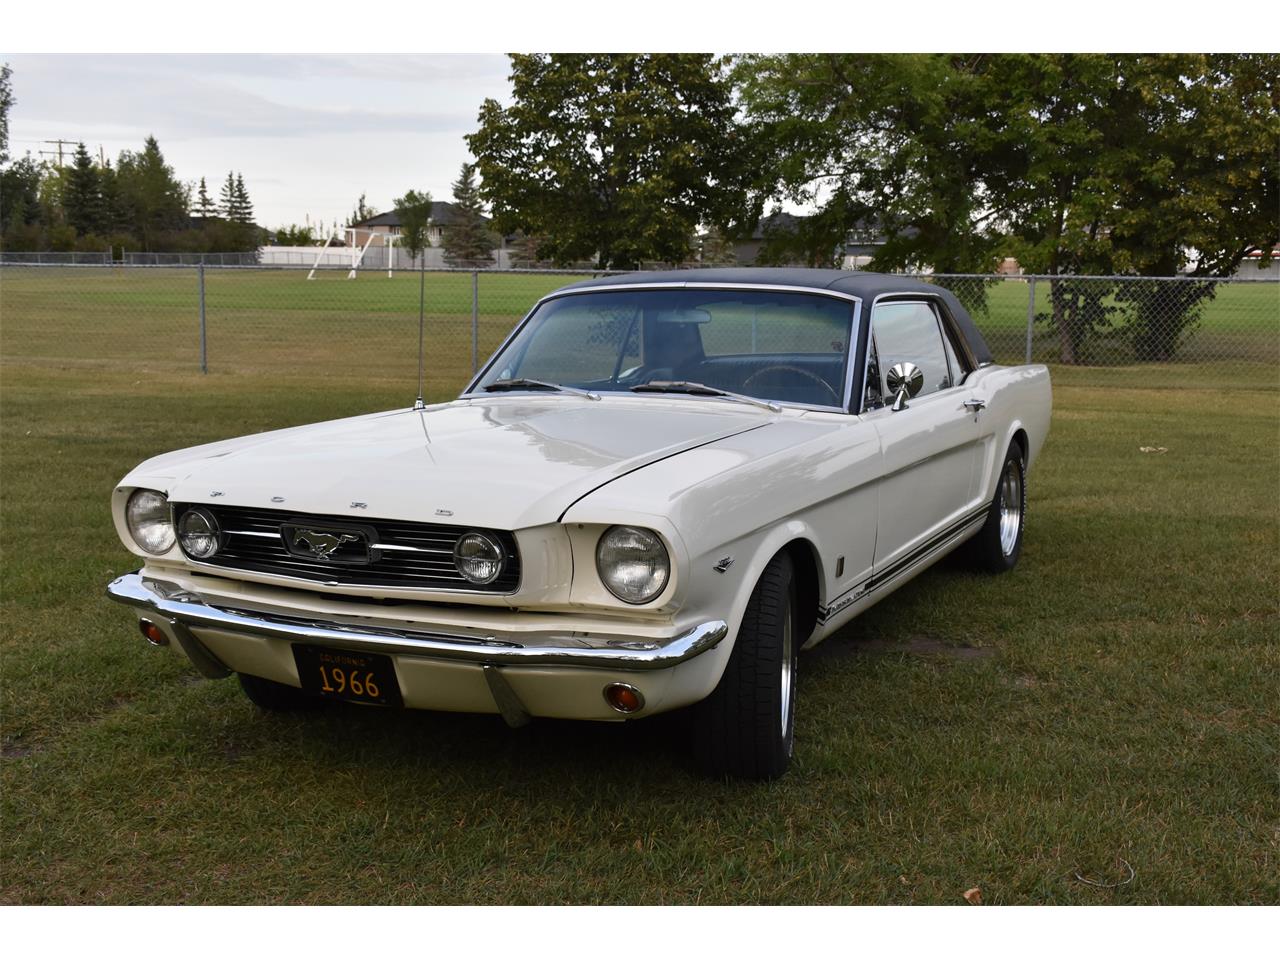 Muscle Cars For Sale In Saskatchewan - Car Sale and Rentals